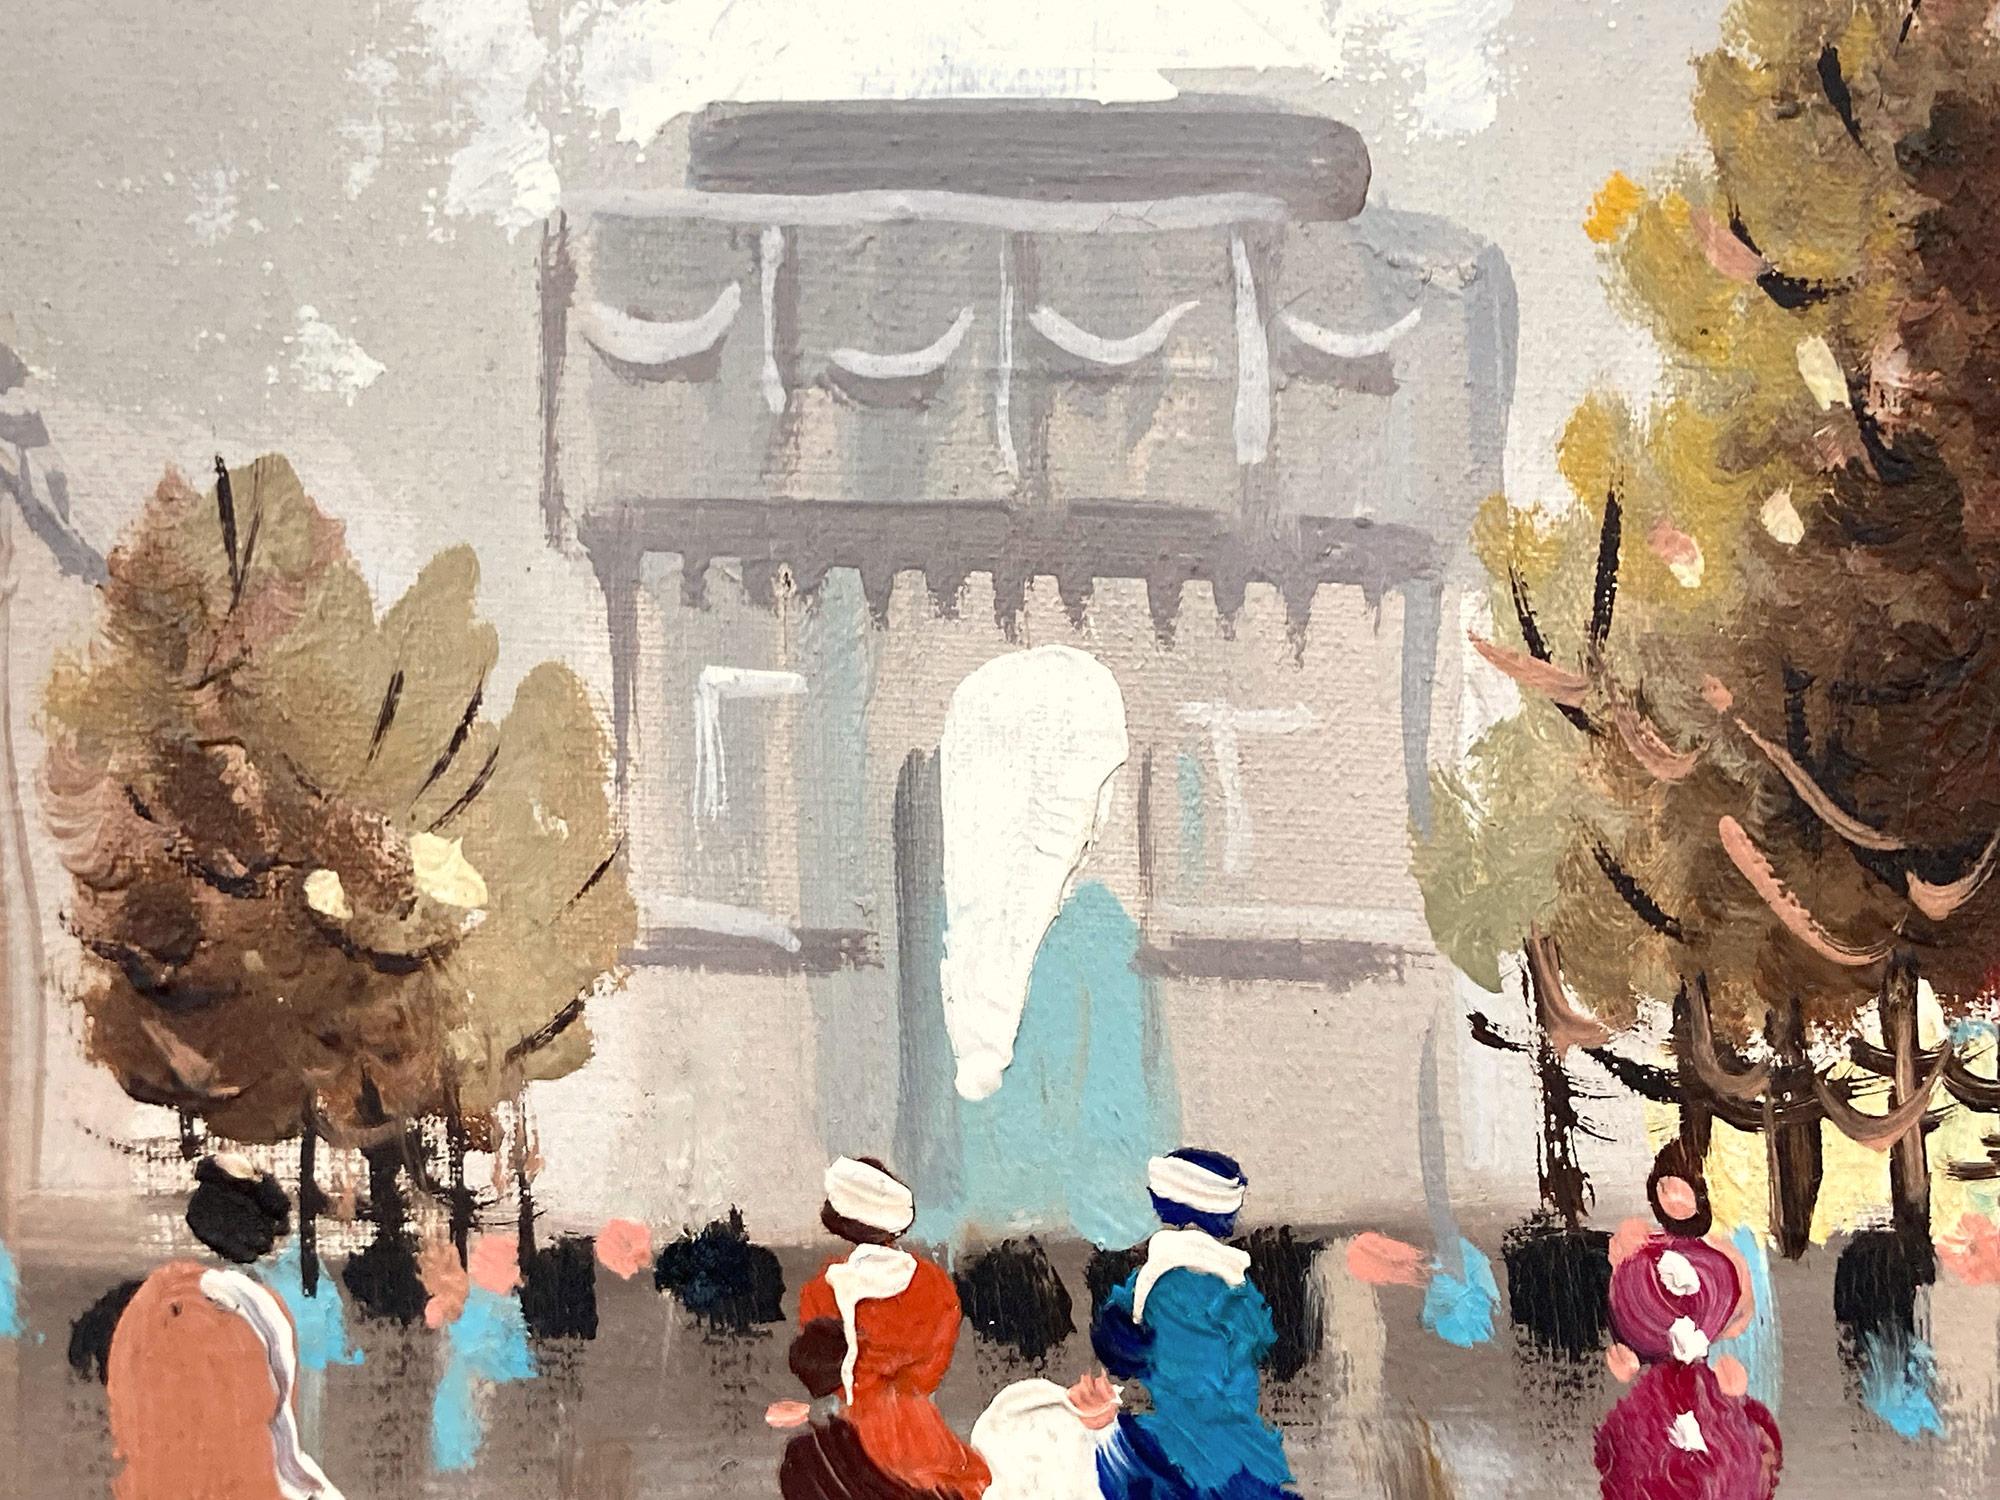 In this piece, the artist depicts his subject in an abstract and impressionistic way, capturing the Arc de Triomphe busy street scene from the 20th Century with much life. The artist mostly used oil with a pallet knife, with impasto paint, and then